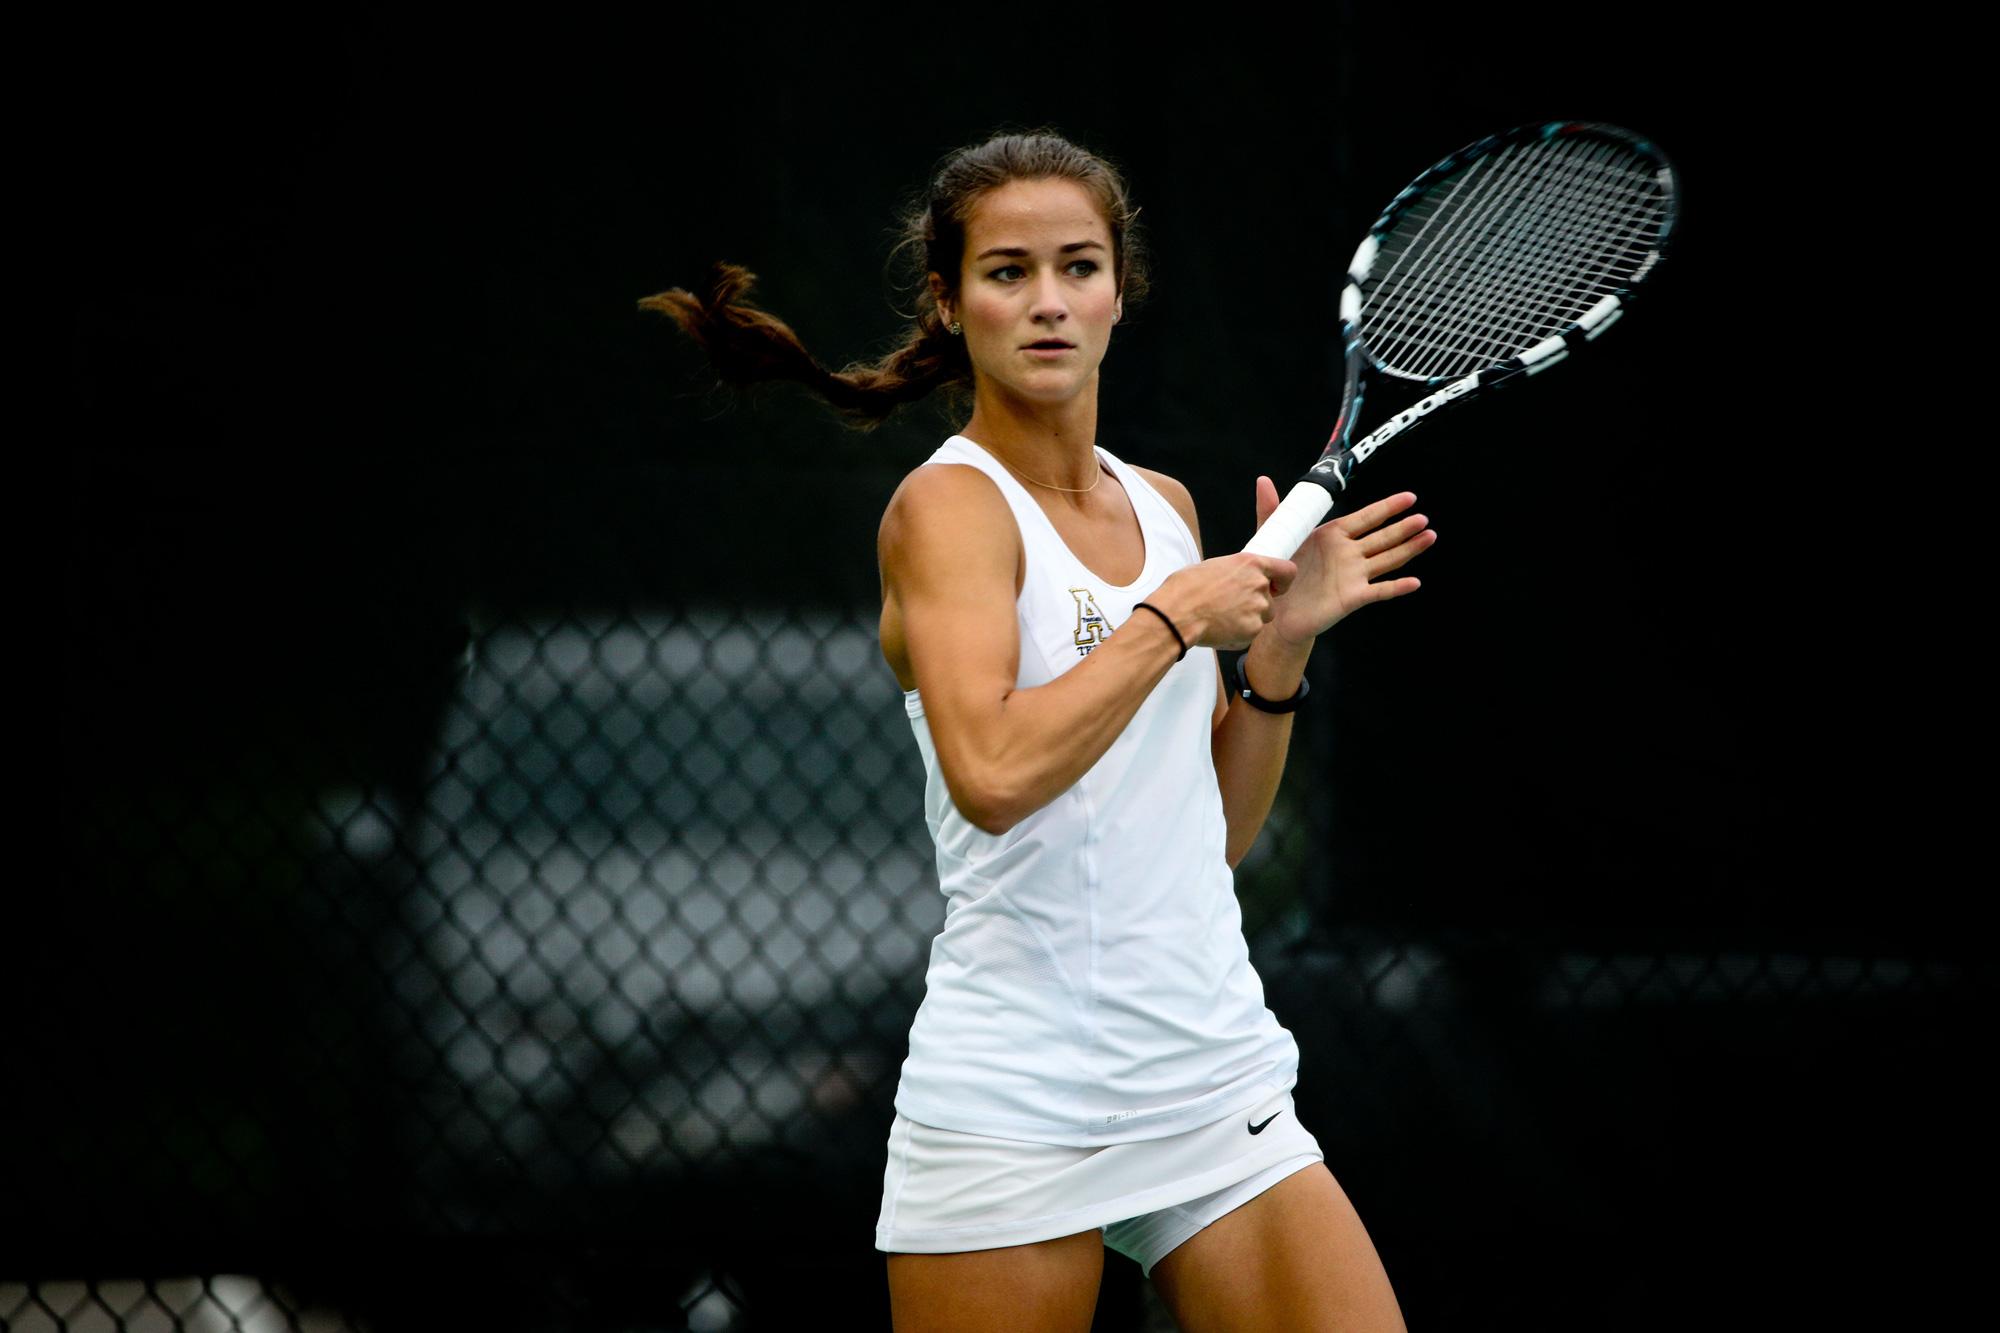 Senior Clare Cox during the first round of the Sun Belt Tennis Tournament at the City Park Tennis Center on Thursday, April 16th, 2015. Photo by Derick E. Hingle/Sun Belt.